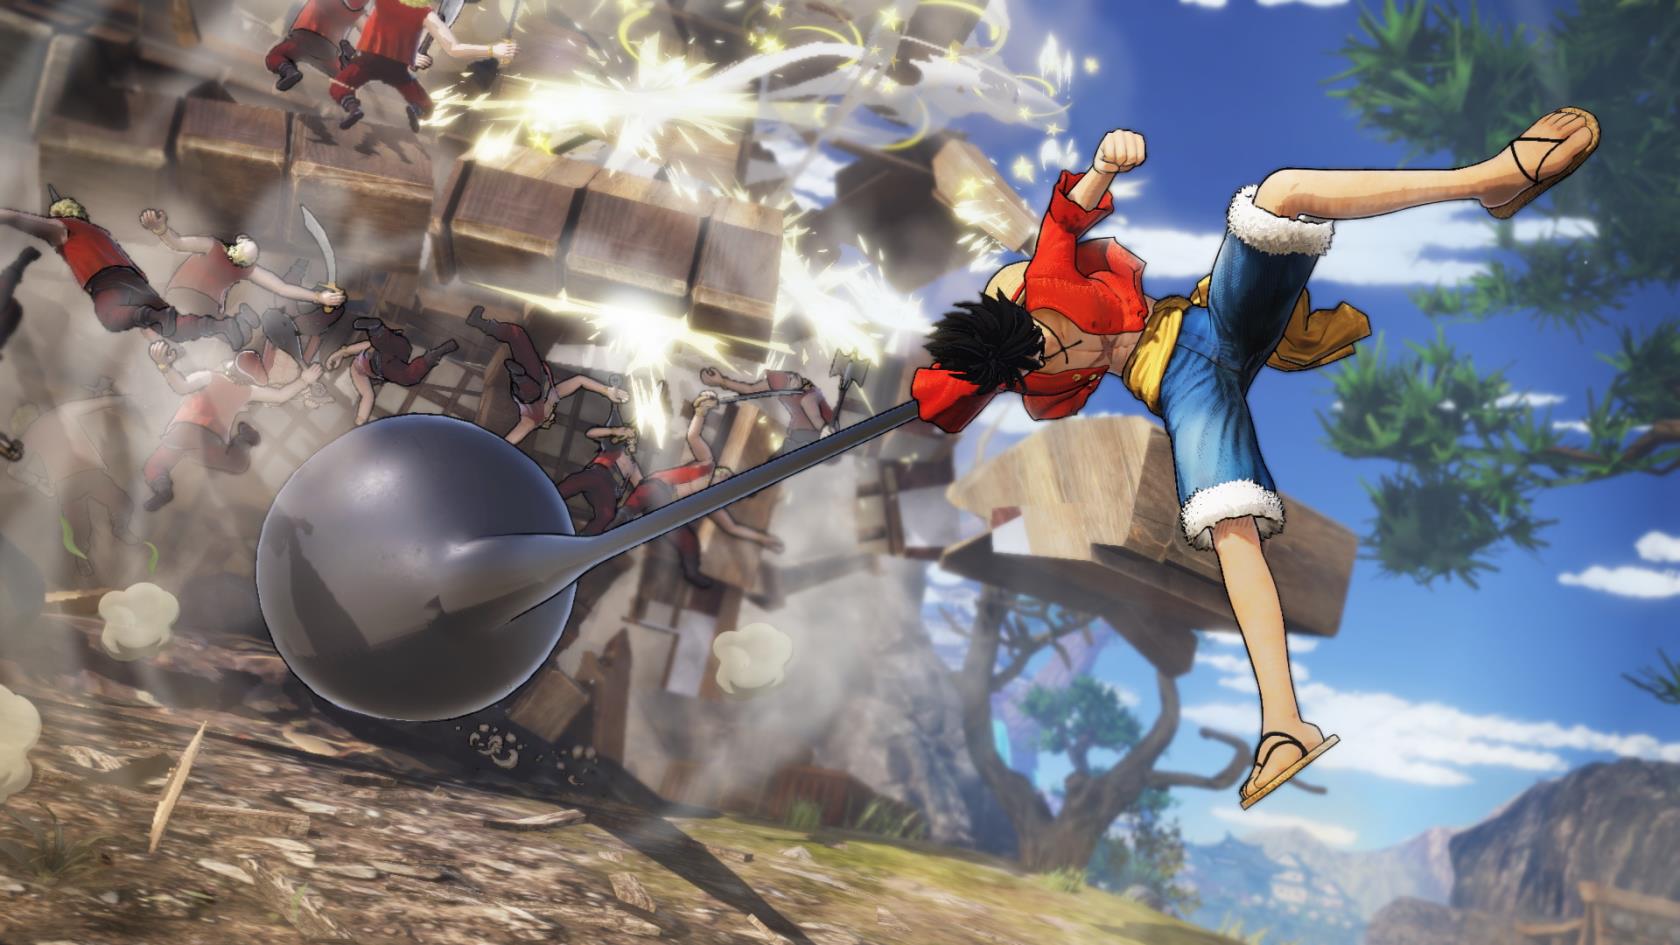 Top 8 Most Interesting And Story-Slaying One Piece Games On PC, Mobile